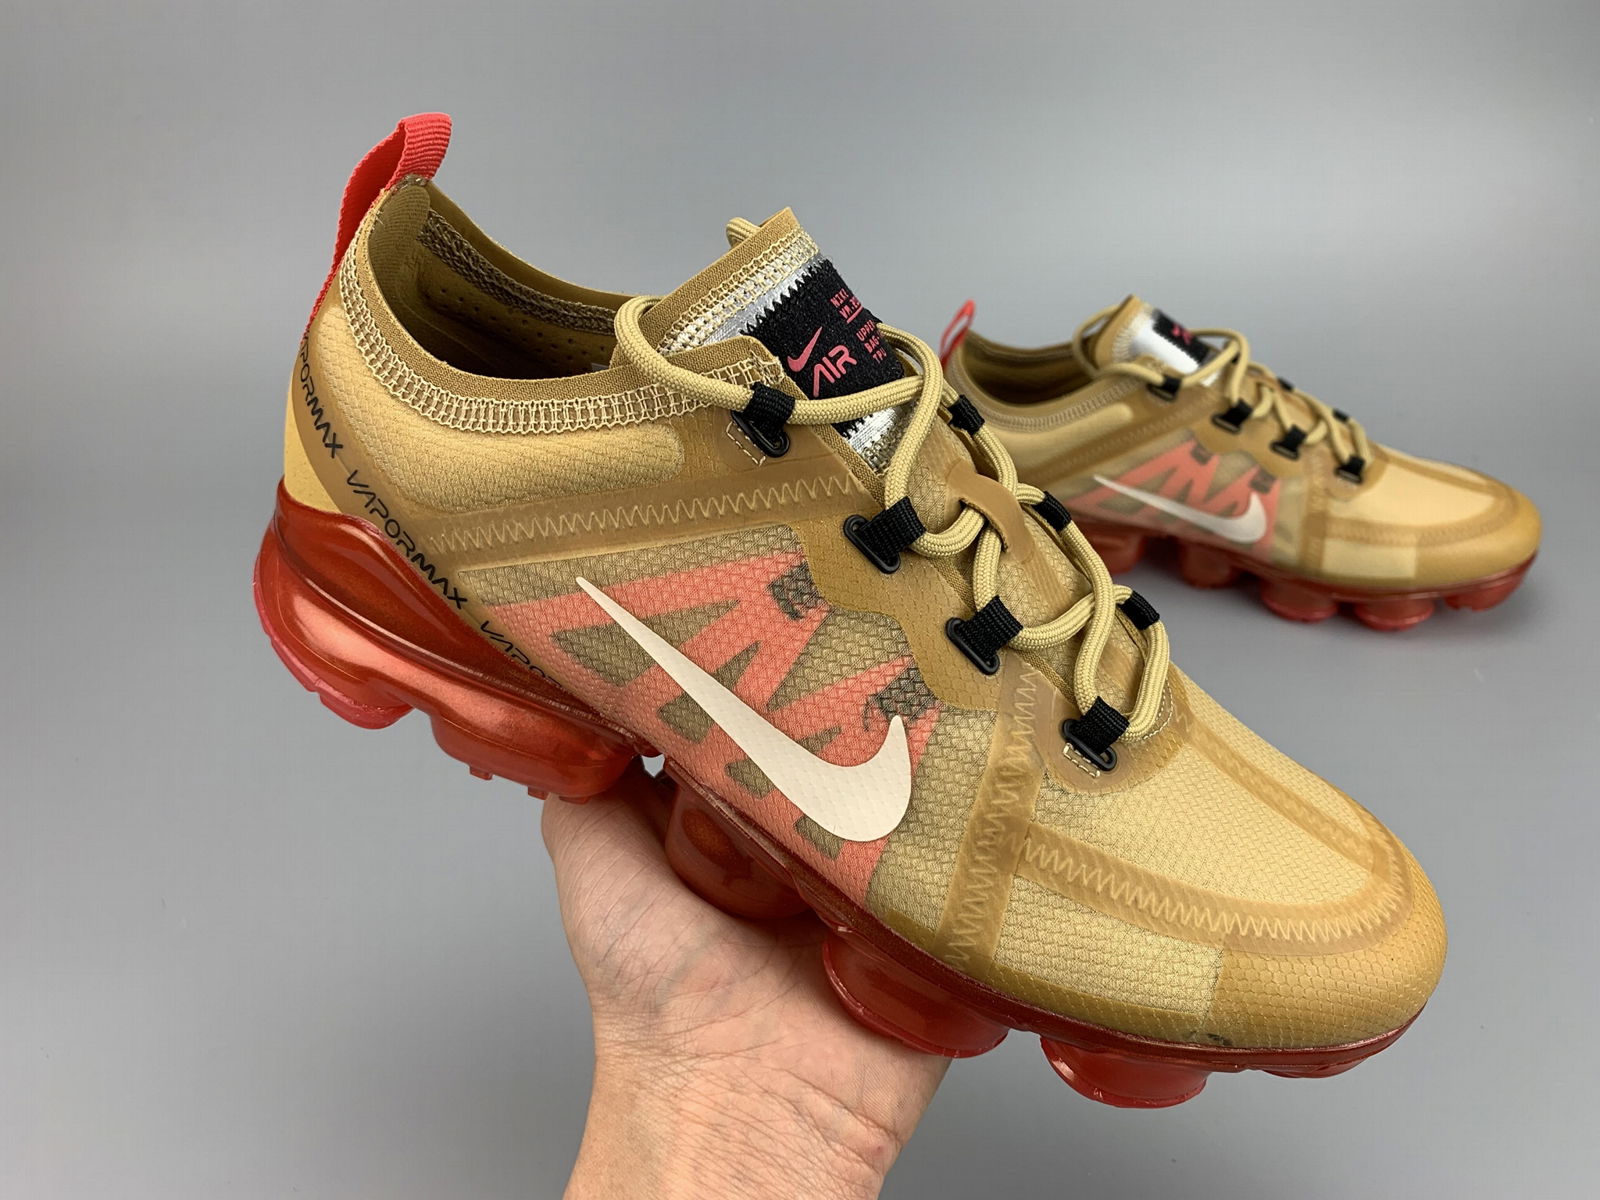 vapormax 2019 yupoo, enormous deal Save 51% available - statehouse.gov.sl